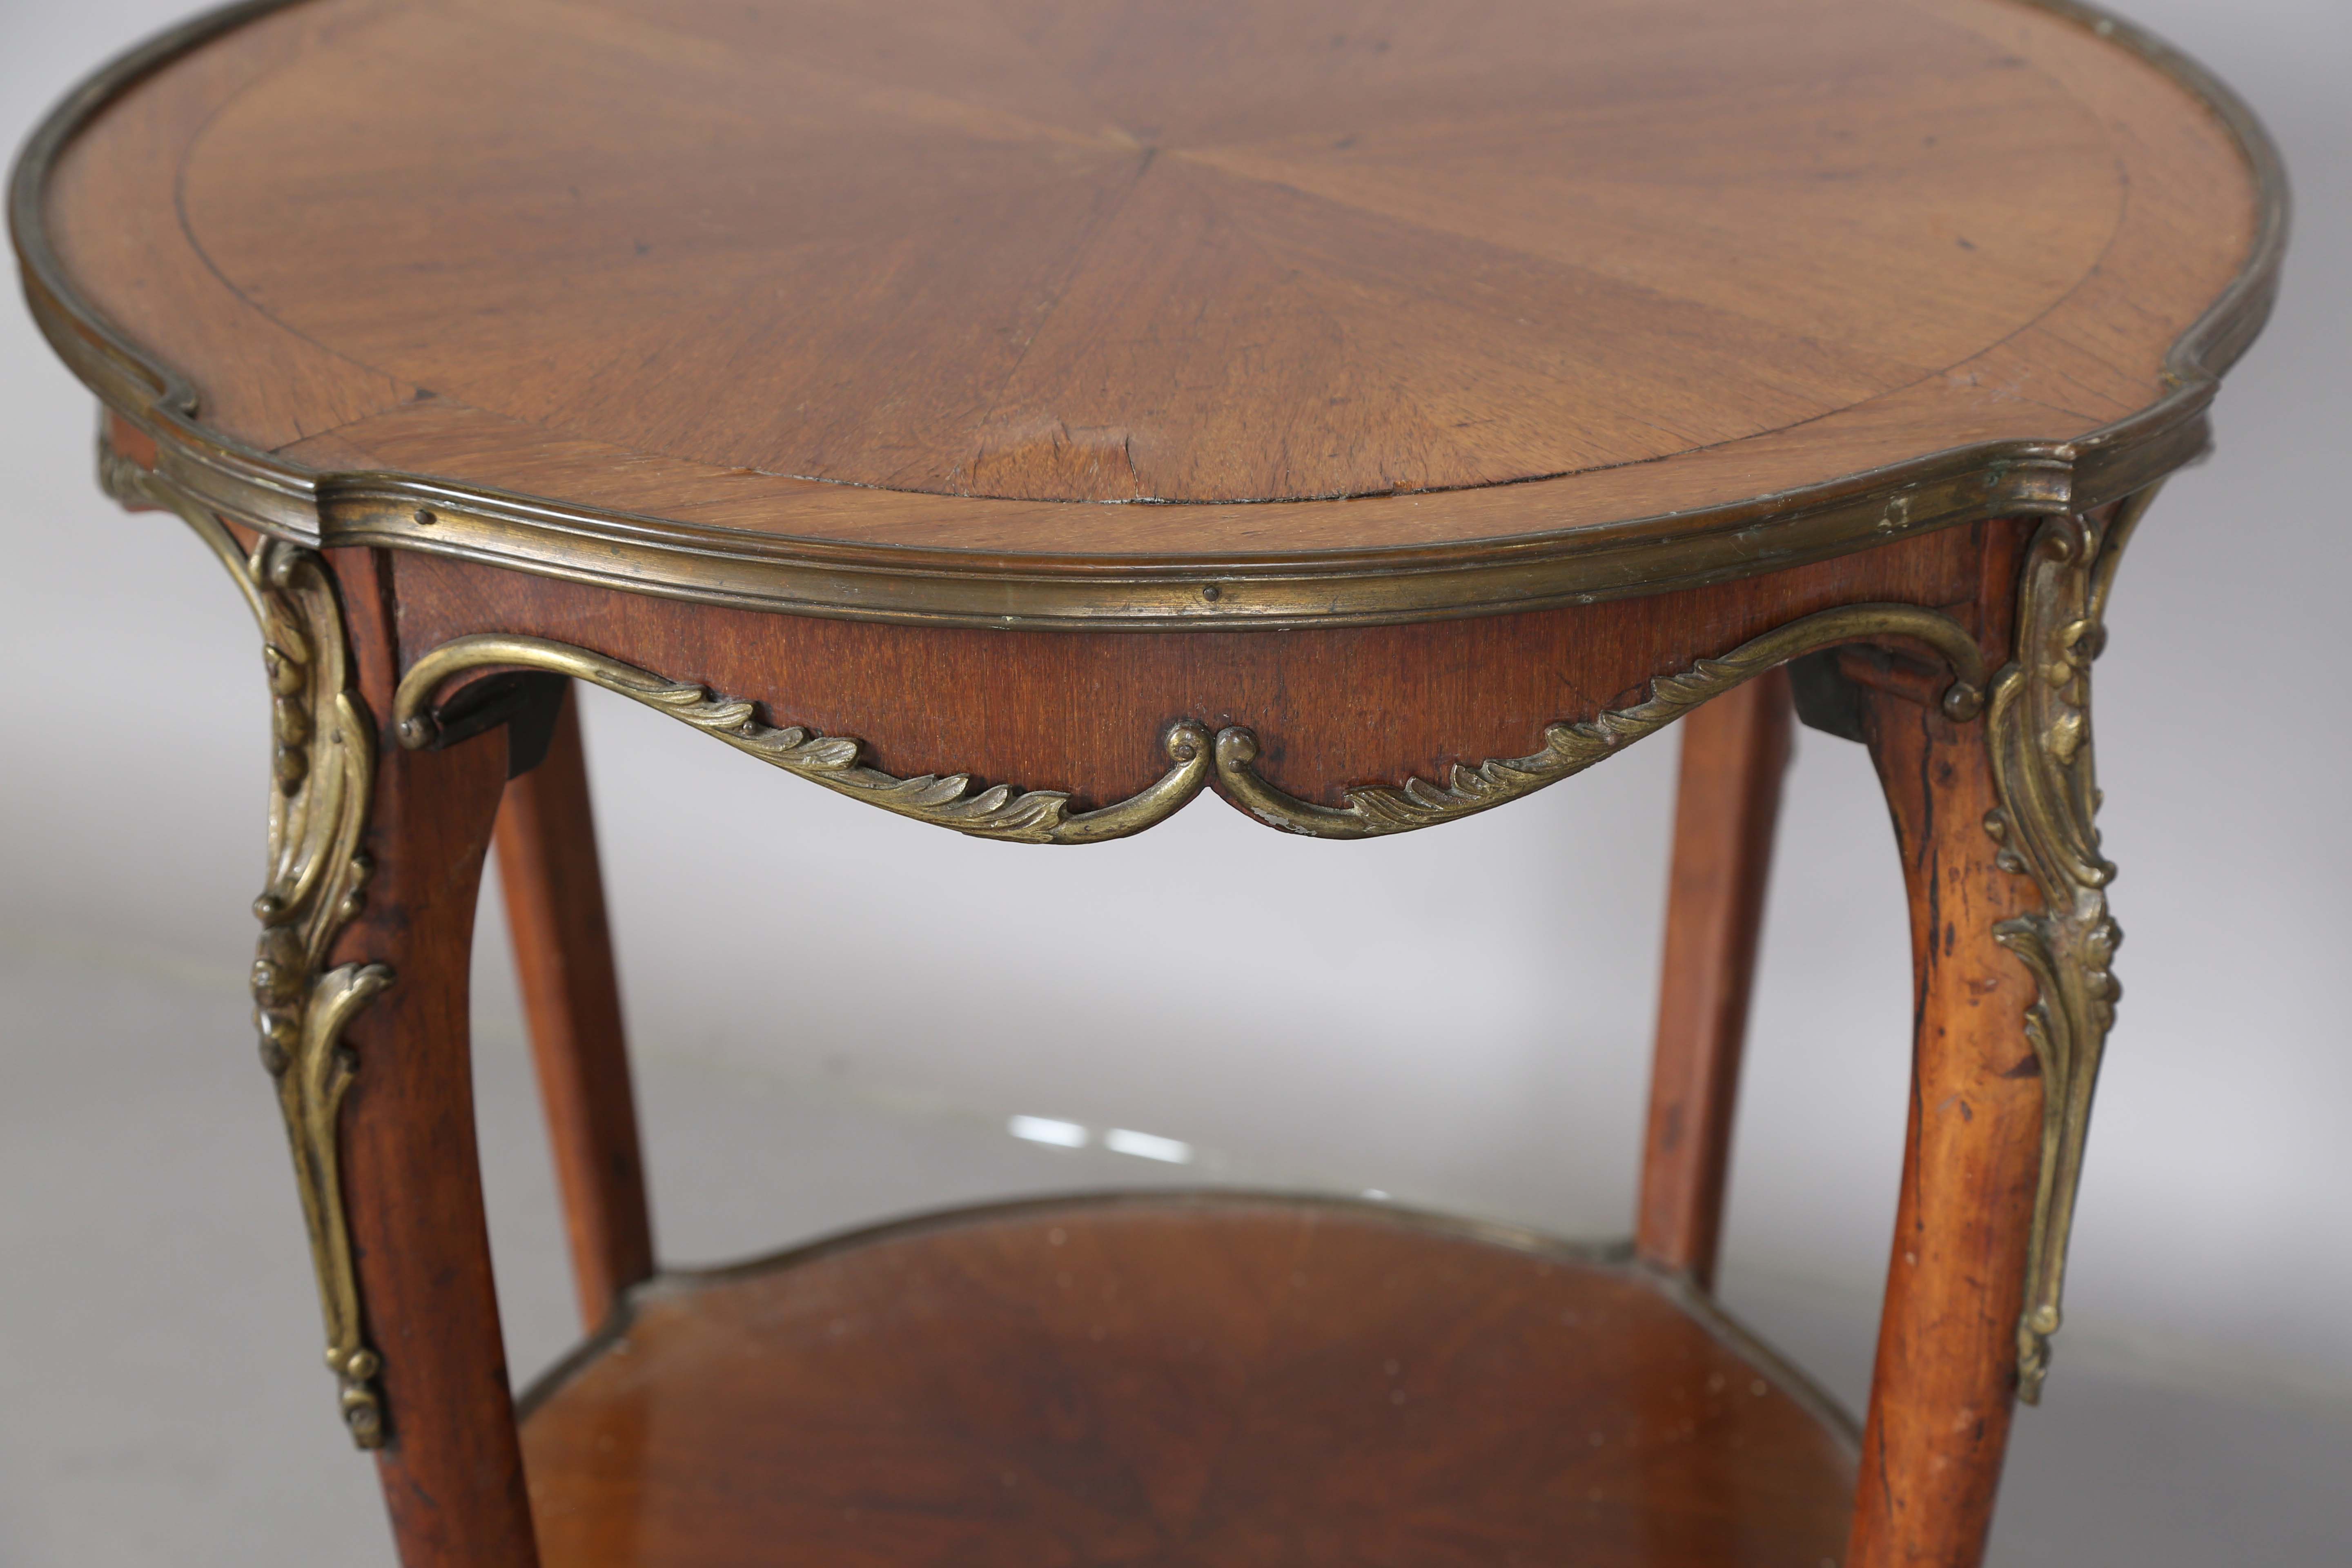 An early 20th century French walnut two-tier occasional table with radial veneers and gilt metal - Image 7 of 11